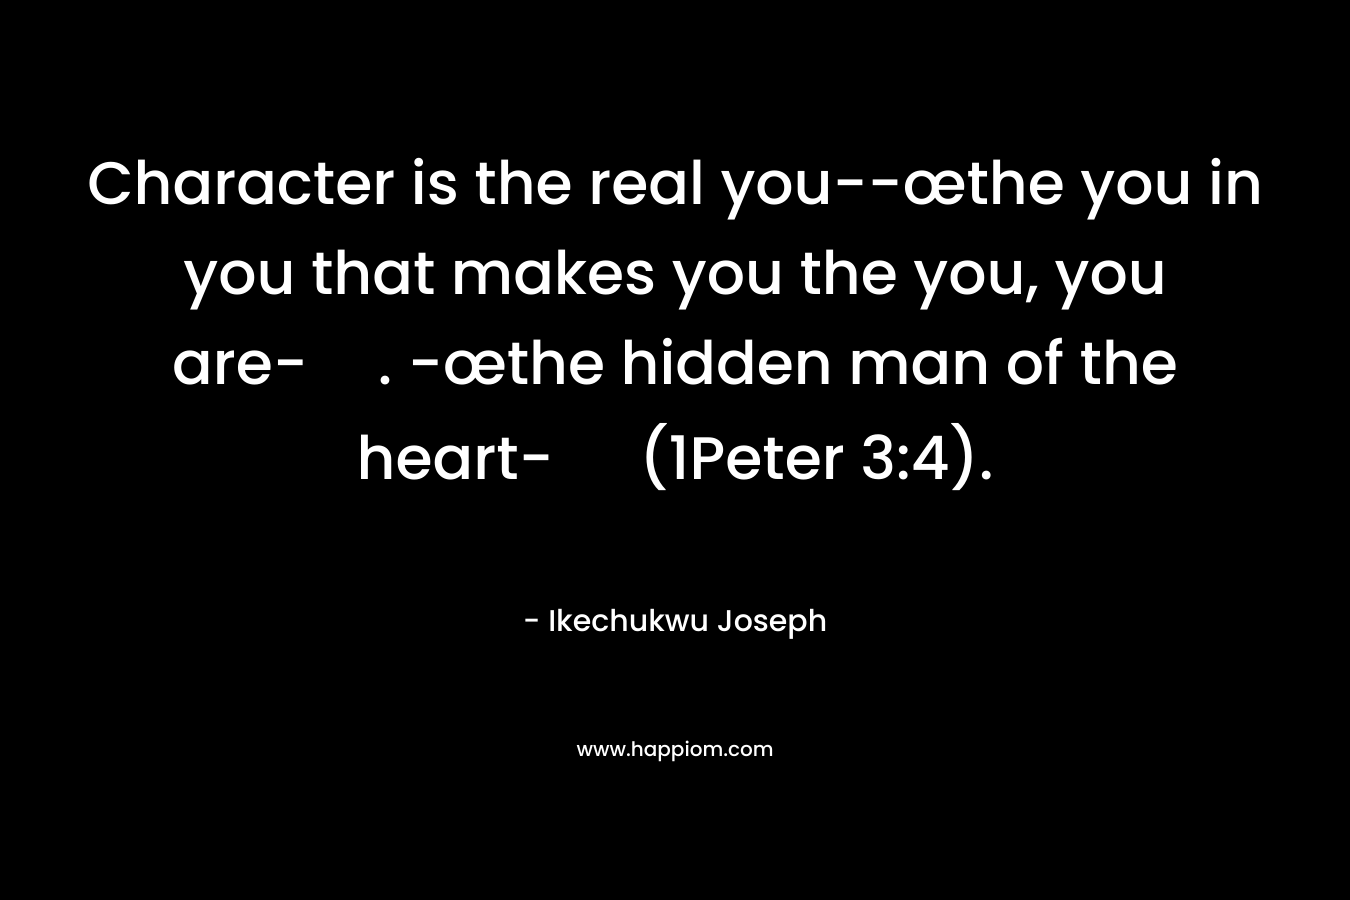 Character is the real you–œthe you in you that makes you the you, you are-. -œthe hidden man of the heart- (1Peter 3:4). – Ikechukwu Joseph